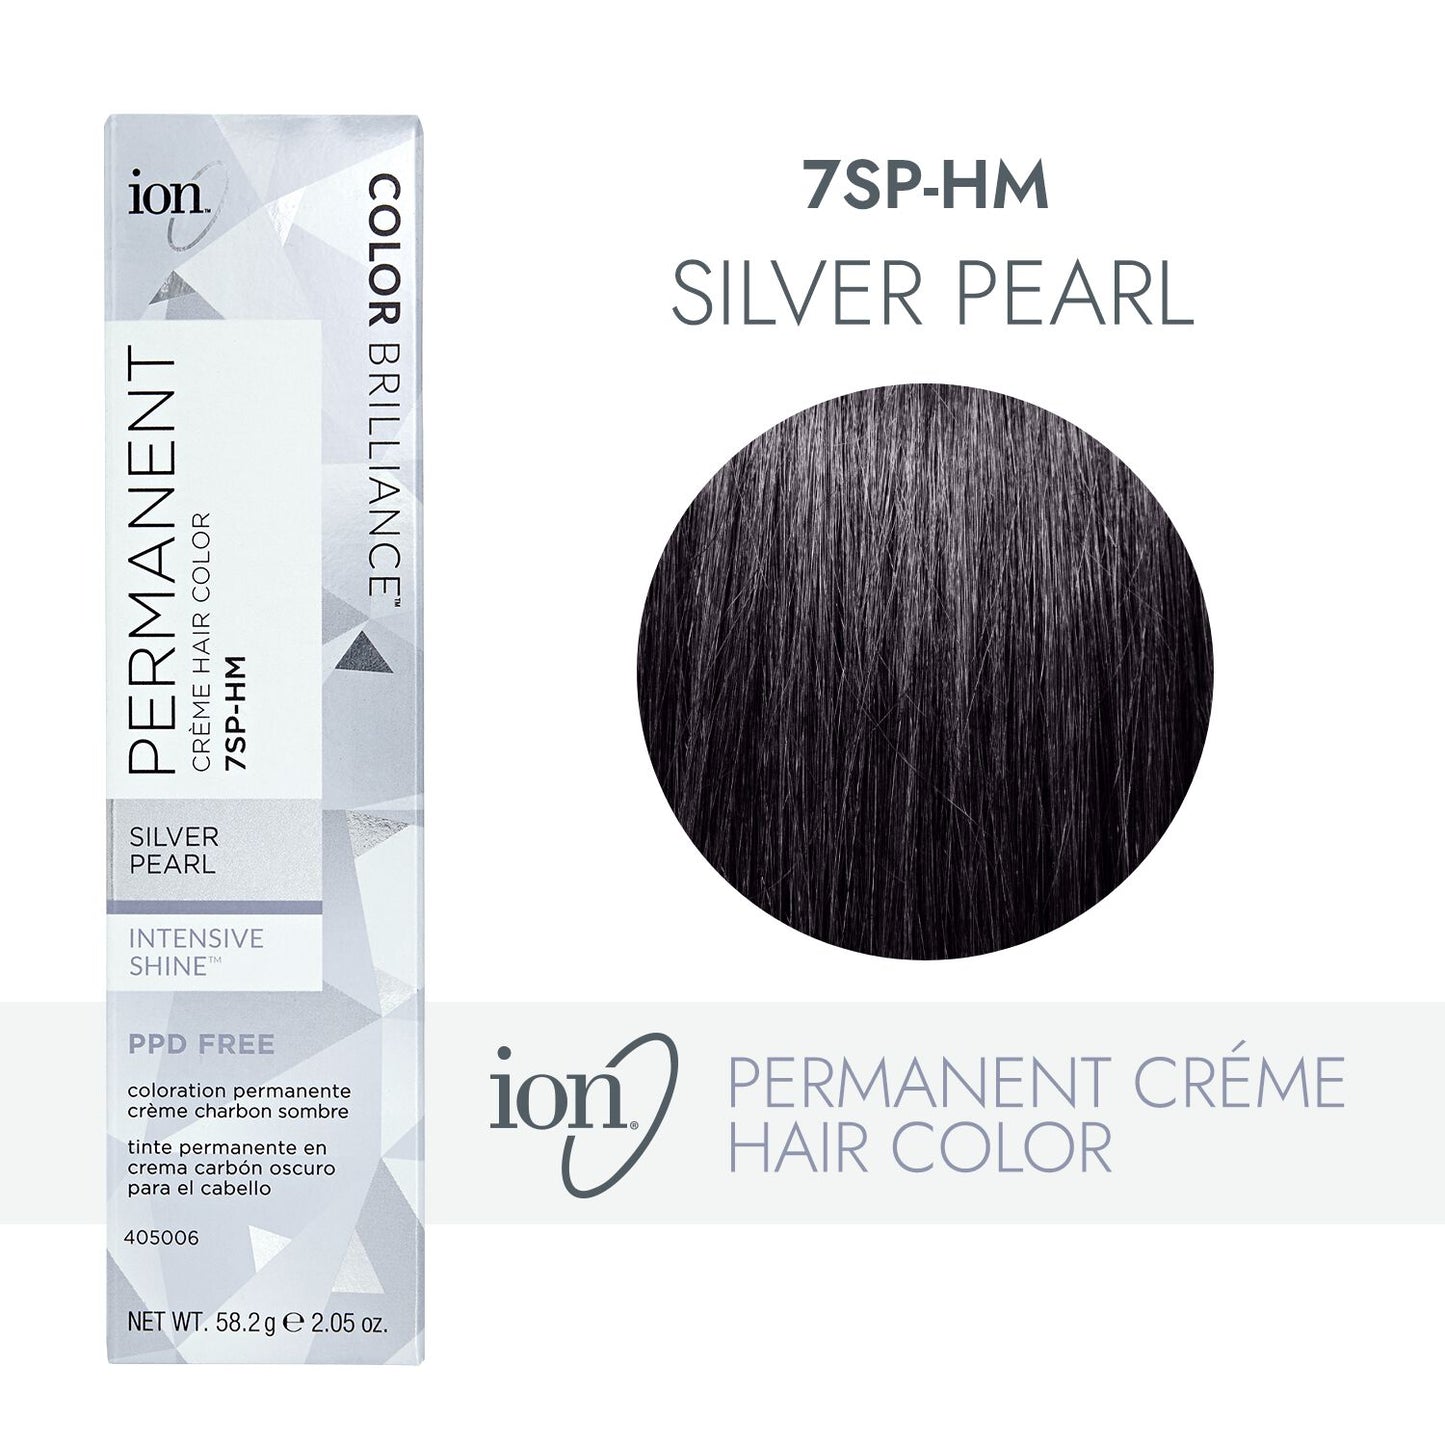 ion 7SP-HM Silver Pearl Permanent Creme Hair Color